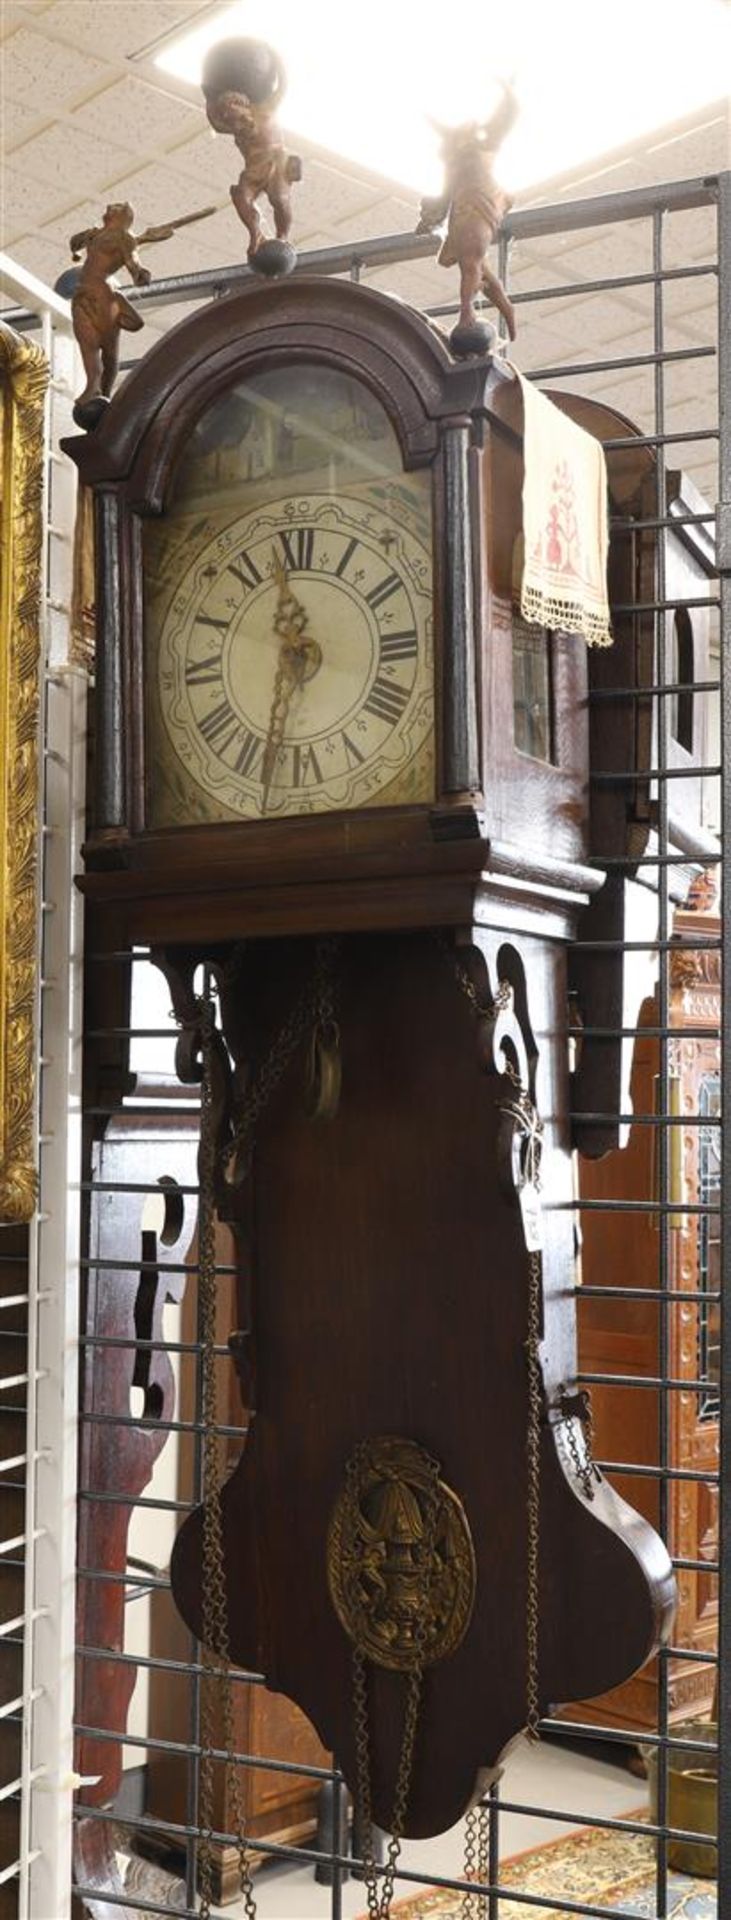 A quarter tail clock or notary clock, Friesland, first half 19th century.